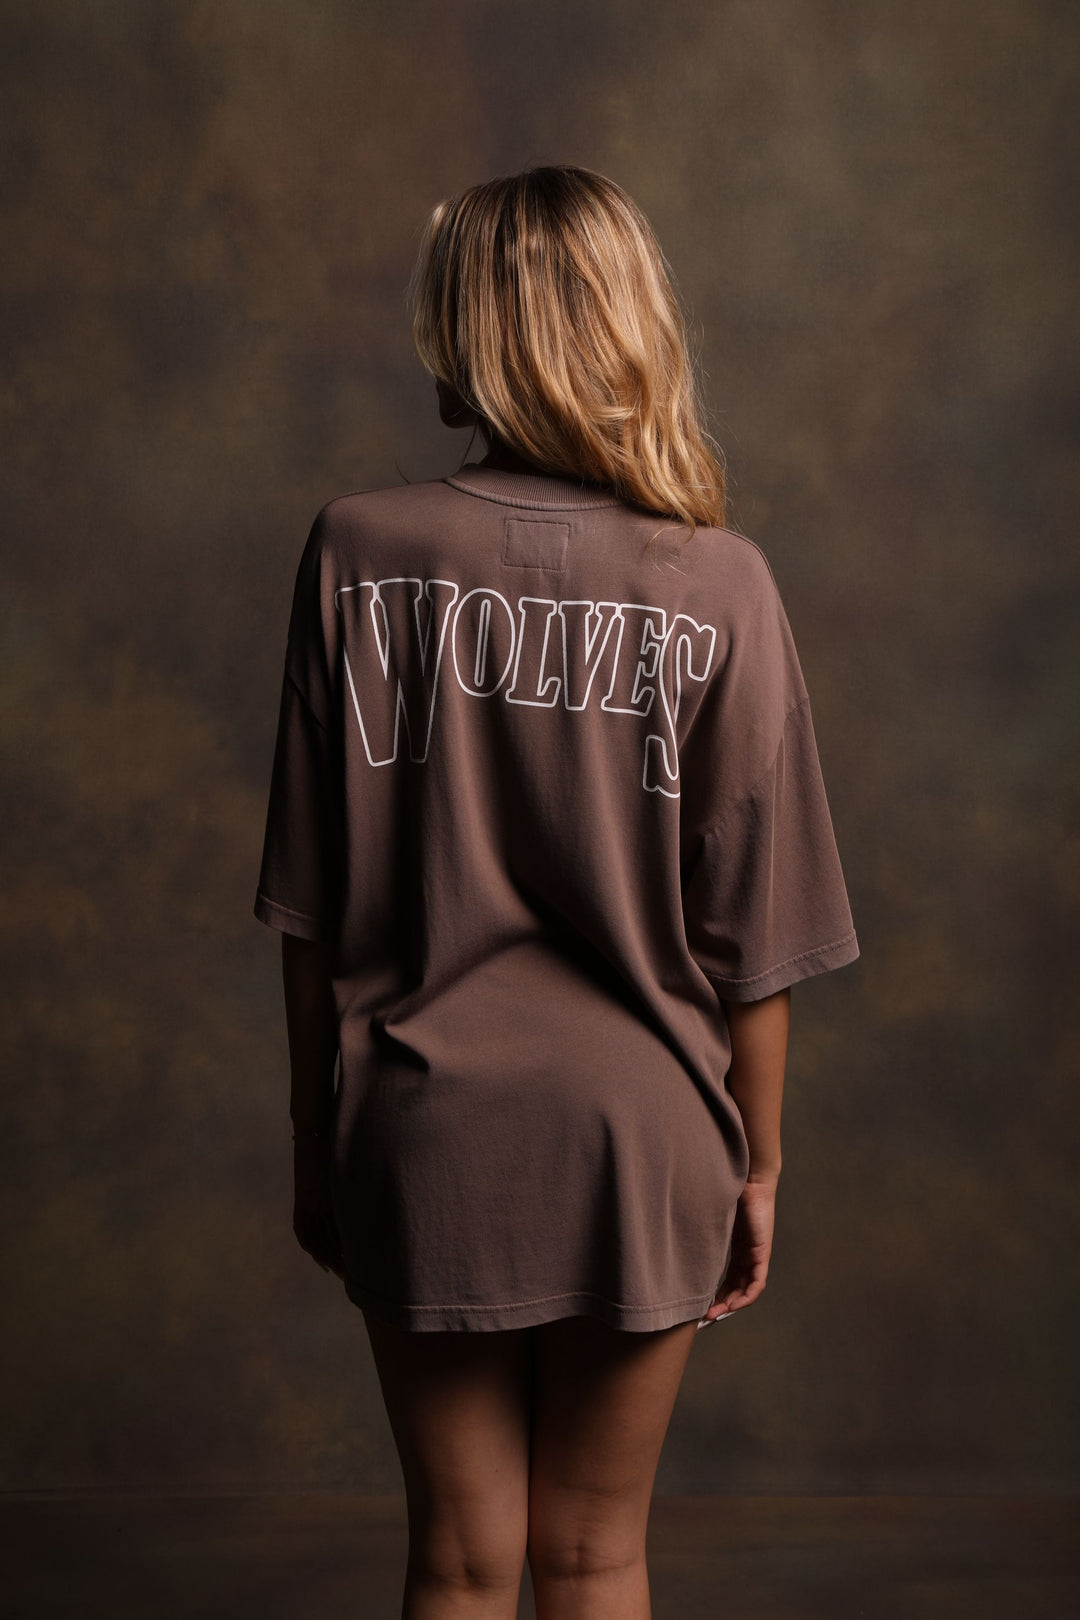 She's Gritty "Premium Vintage" Pump Cover Tee in Mojave Brown